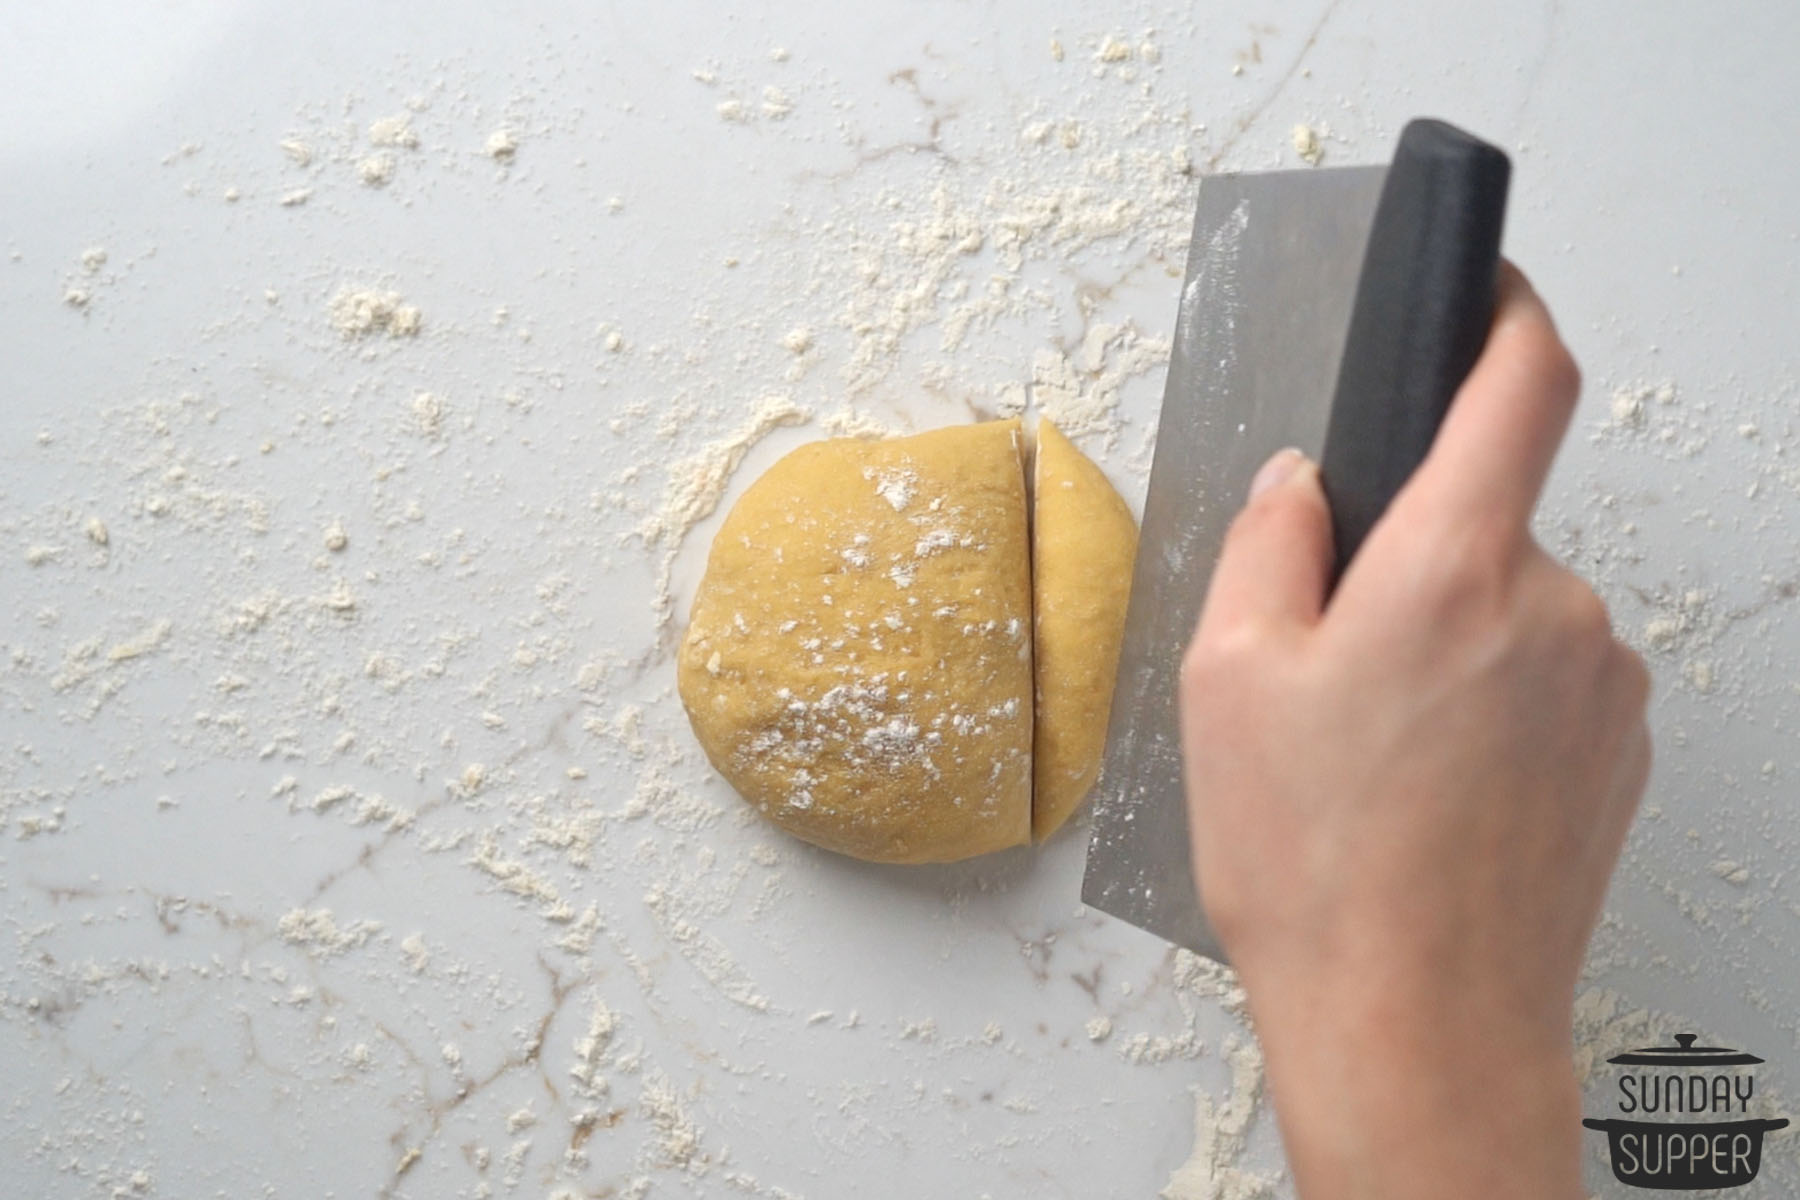 slicing off a portion of the dough with a pastry cutter